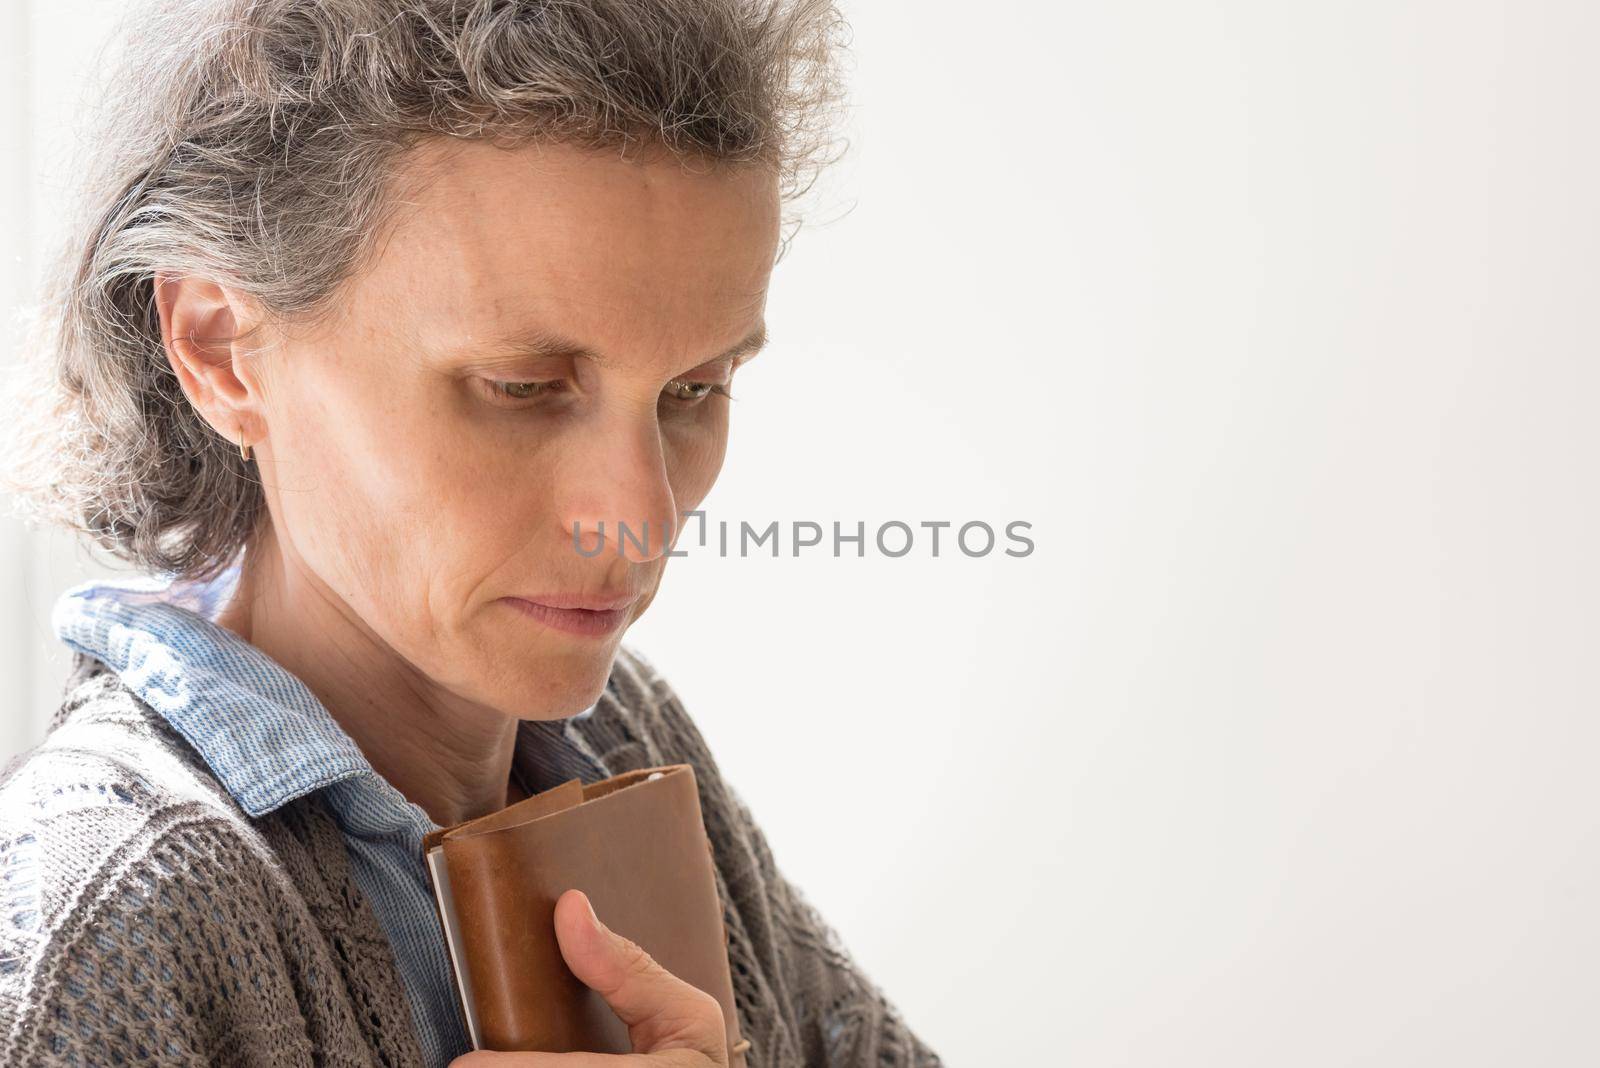 Middle aged woman with grey hair looking tired and anxious and holding book (selective focus)